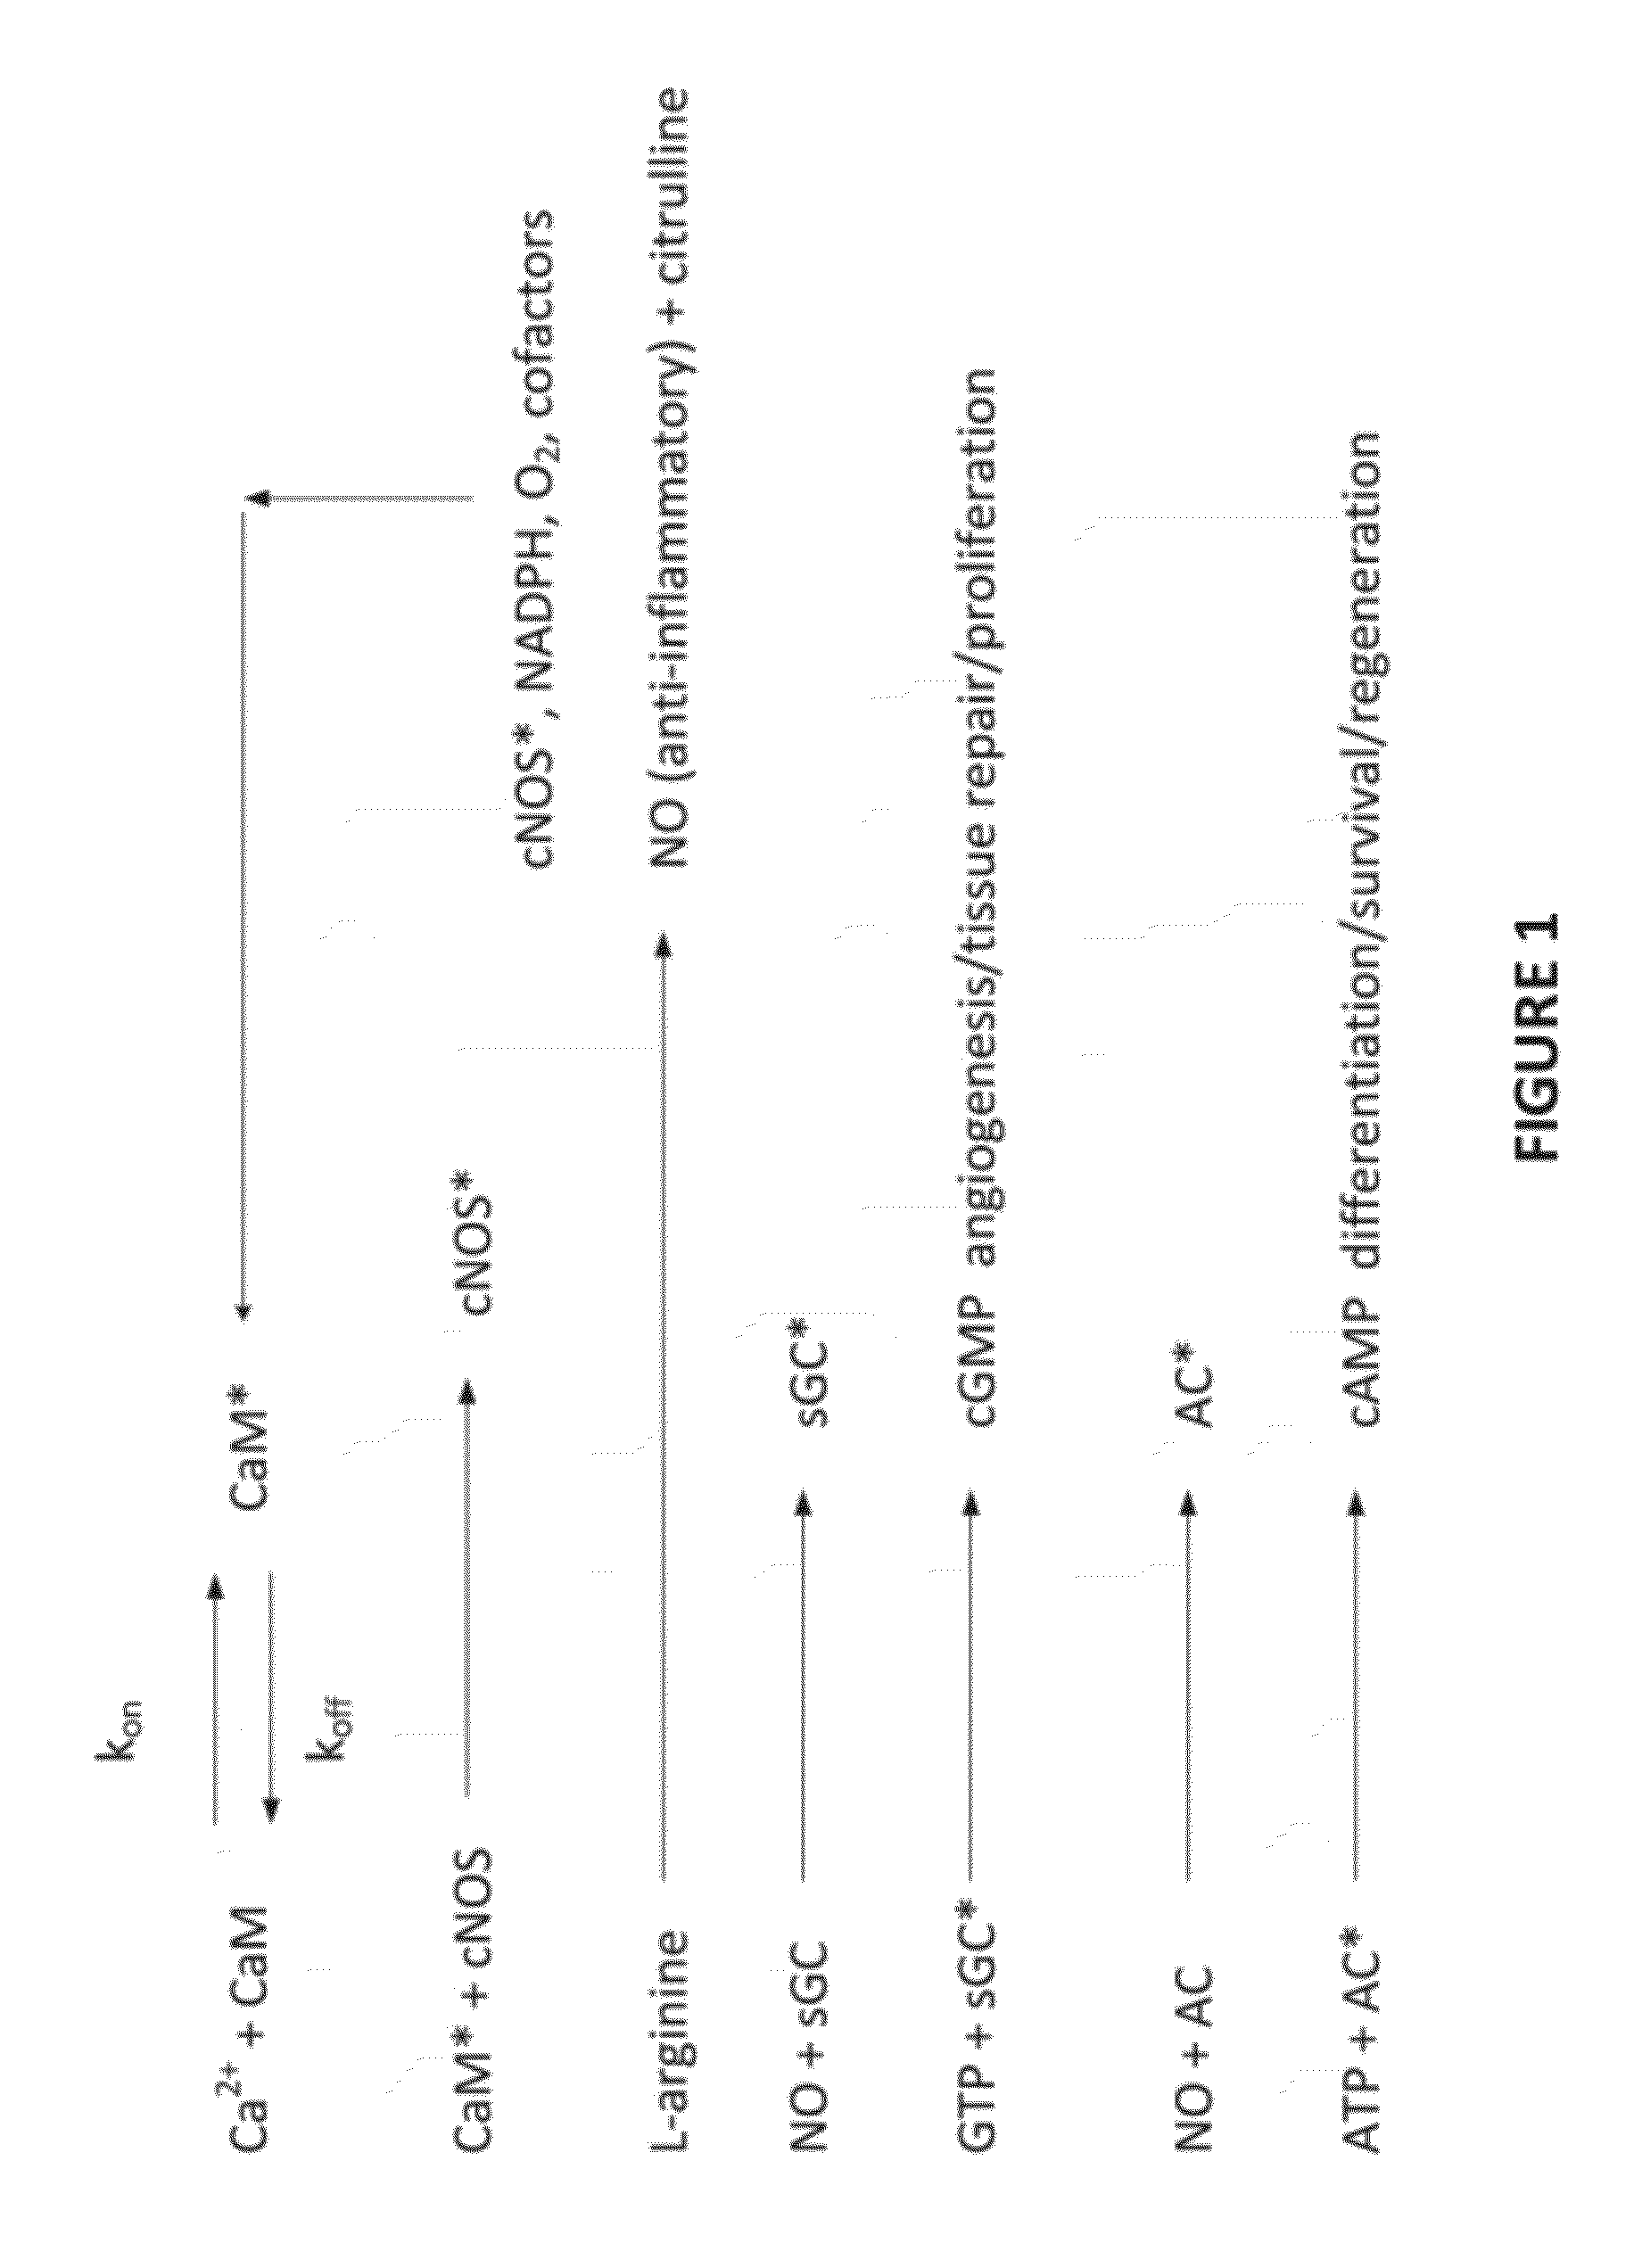 Method and apparatus for electromagnetic enhancement of biochemical signaling pathways for therapeutics and prophylaxis in plants, animals and humans